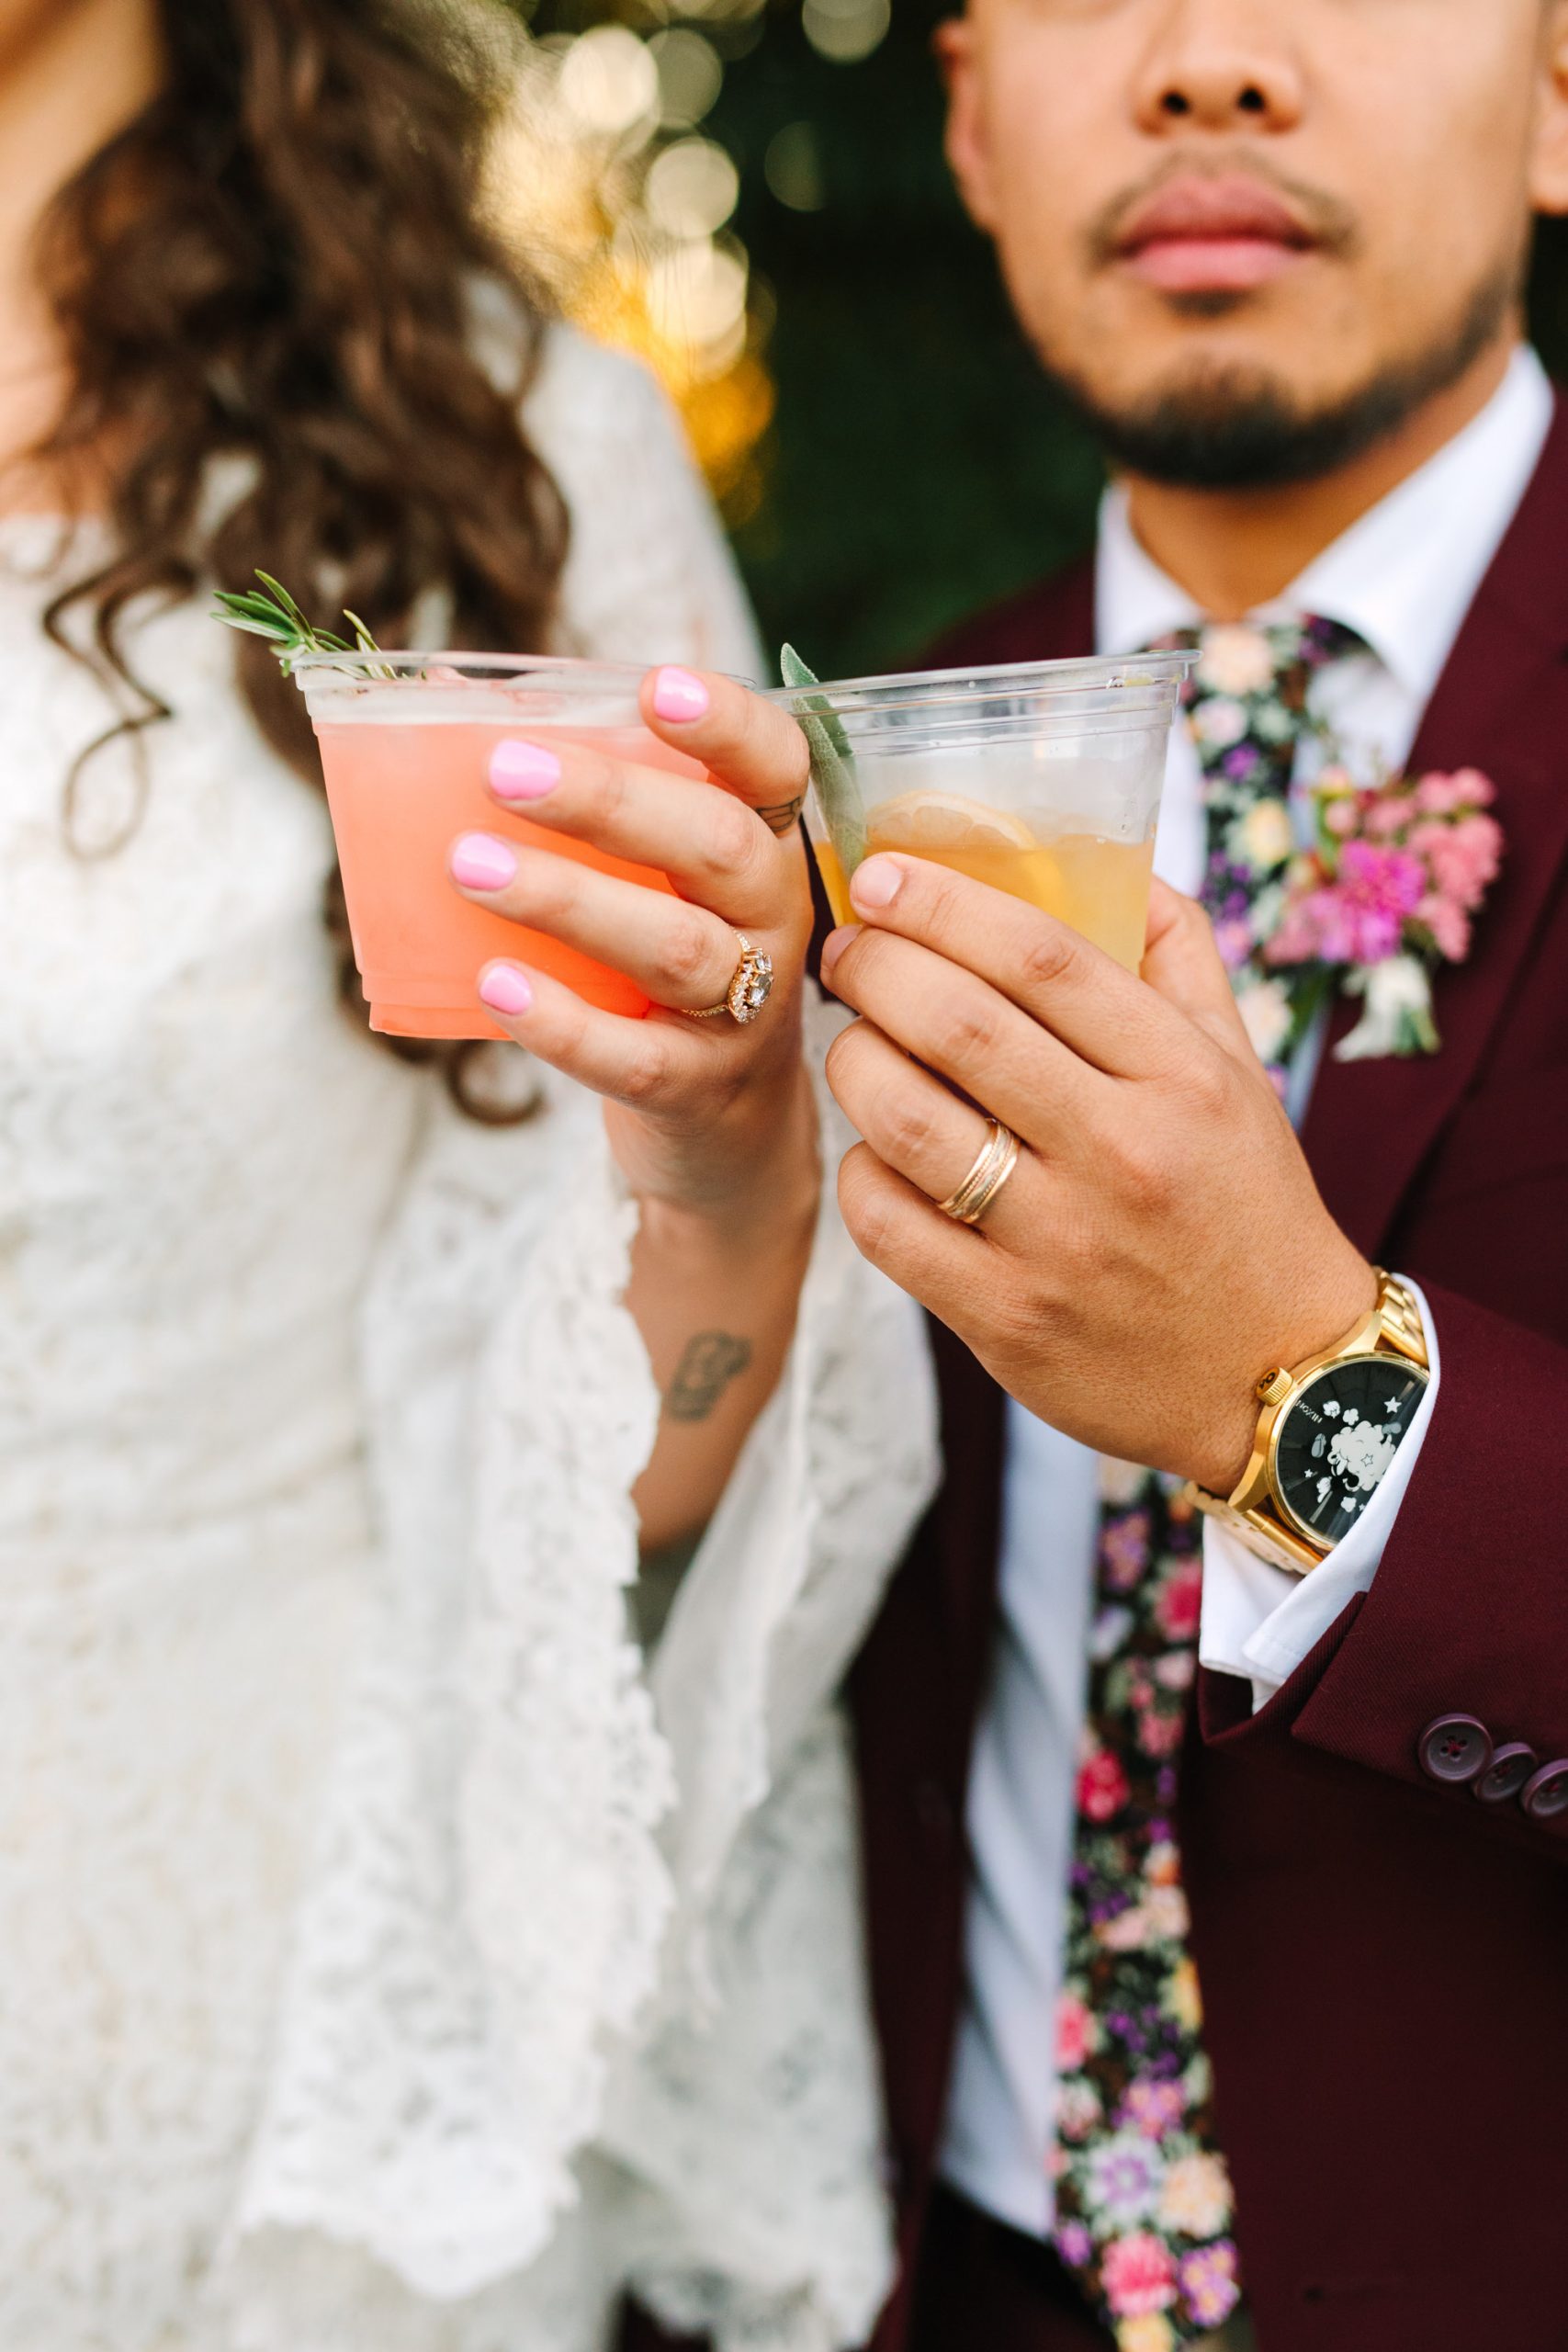 Bride and groom with cocktails and wedding rings - www.marycostaweddings.com